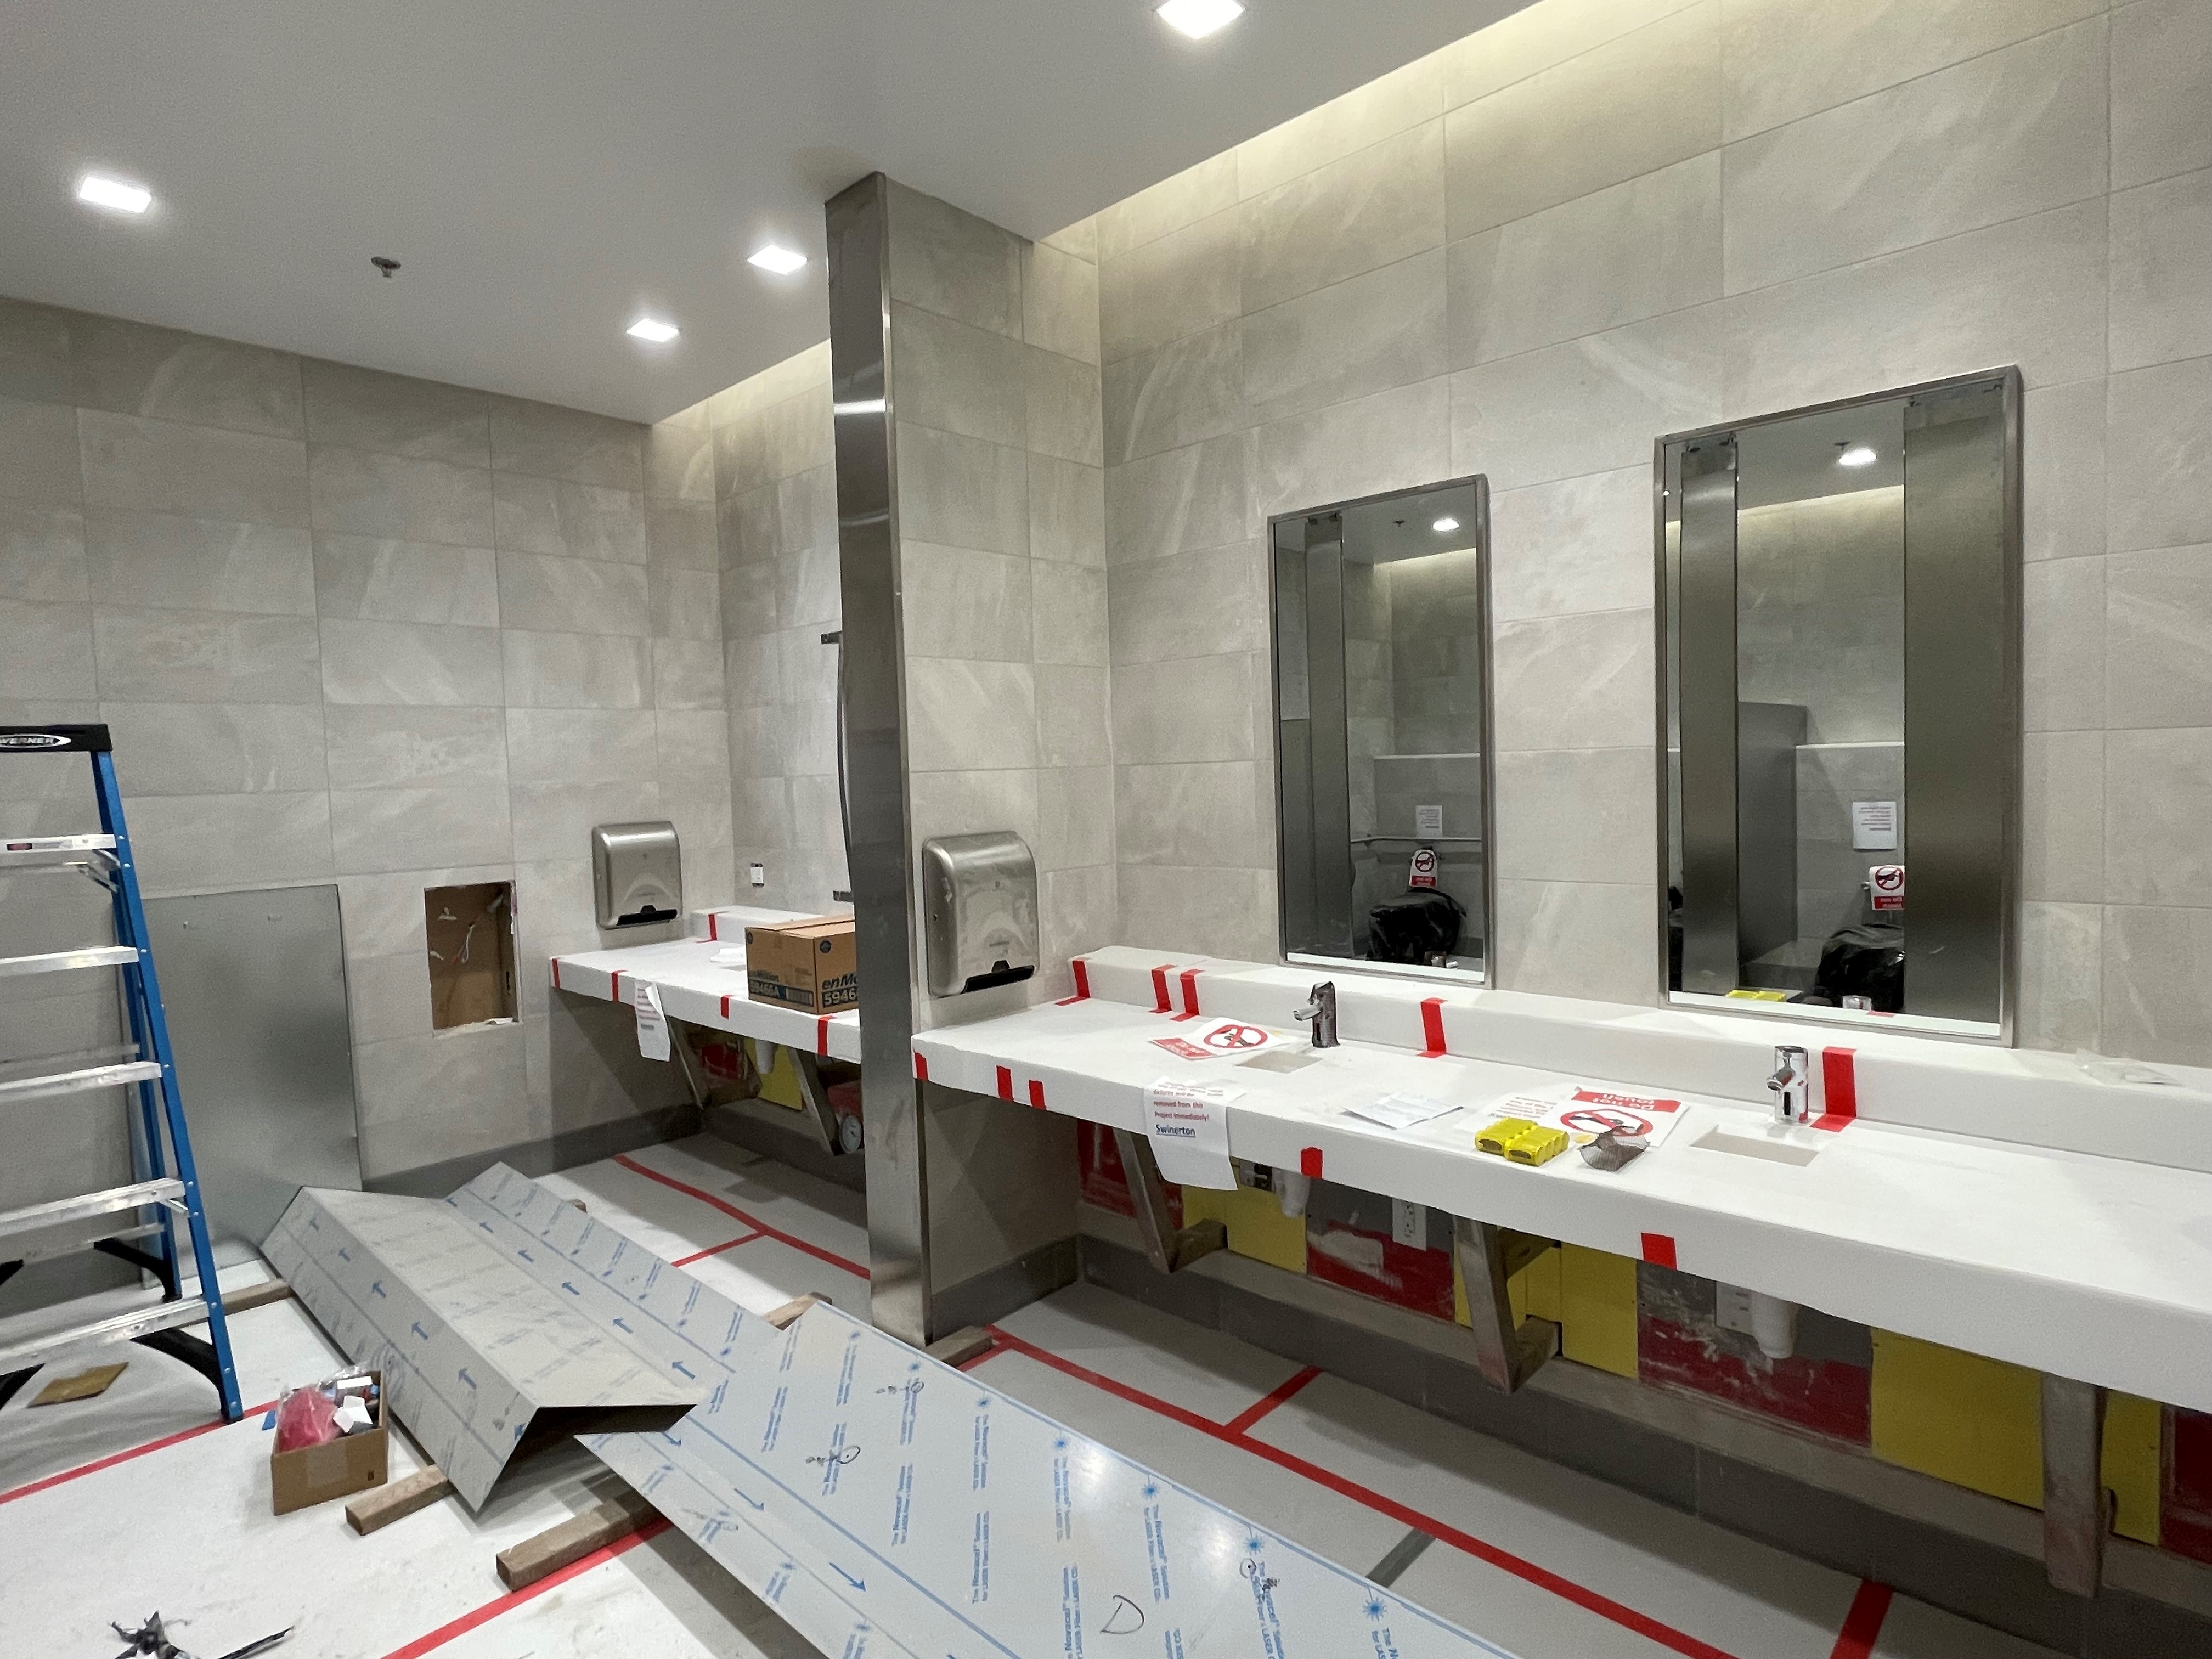 Finishing work, including tiling in public restrooms, continues at the Intermodal Transportation Facility-West.